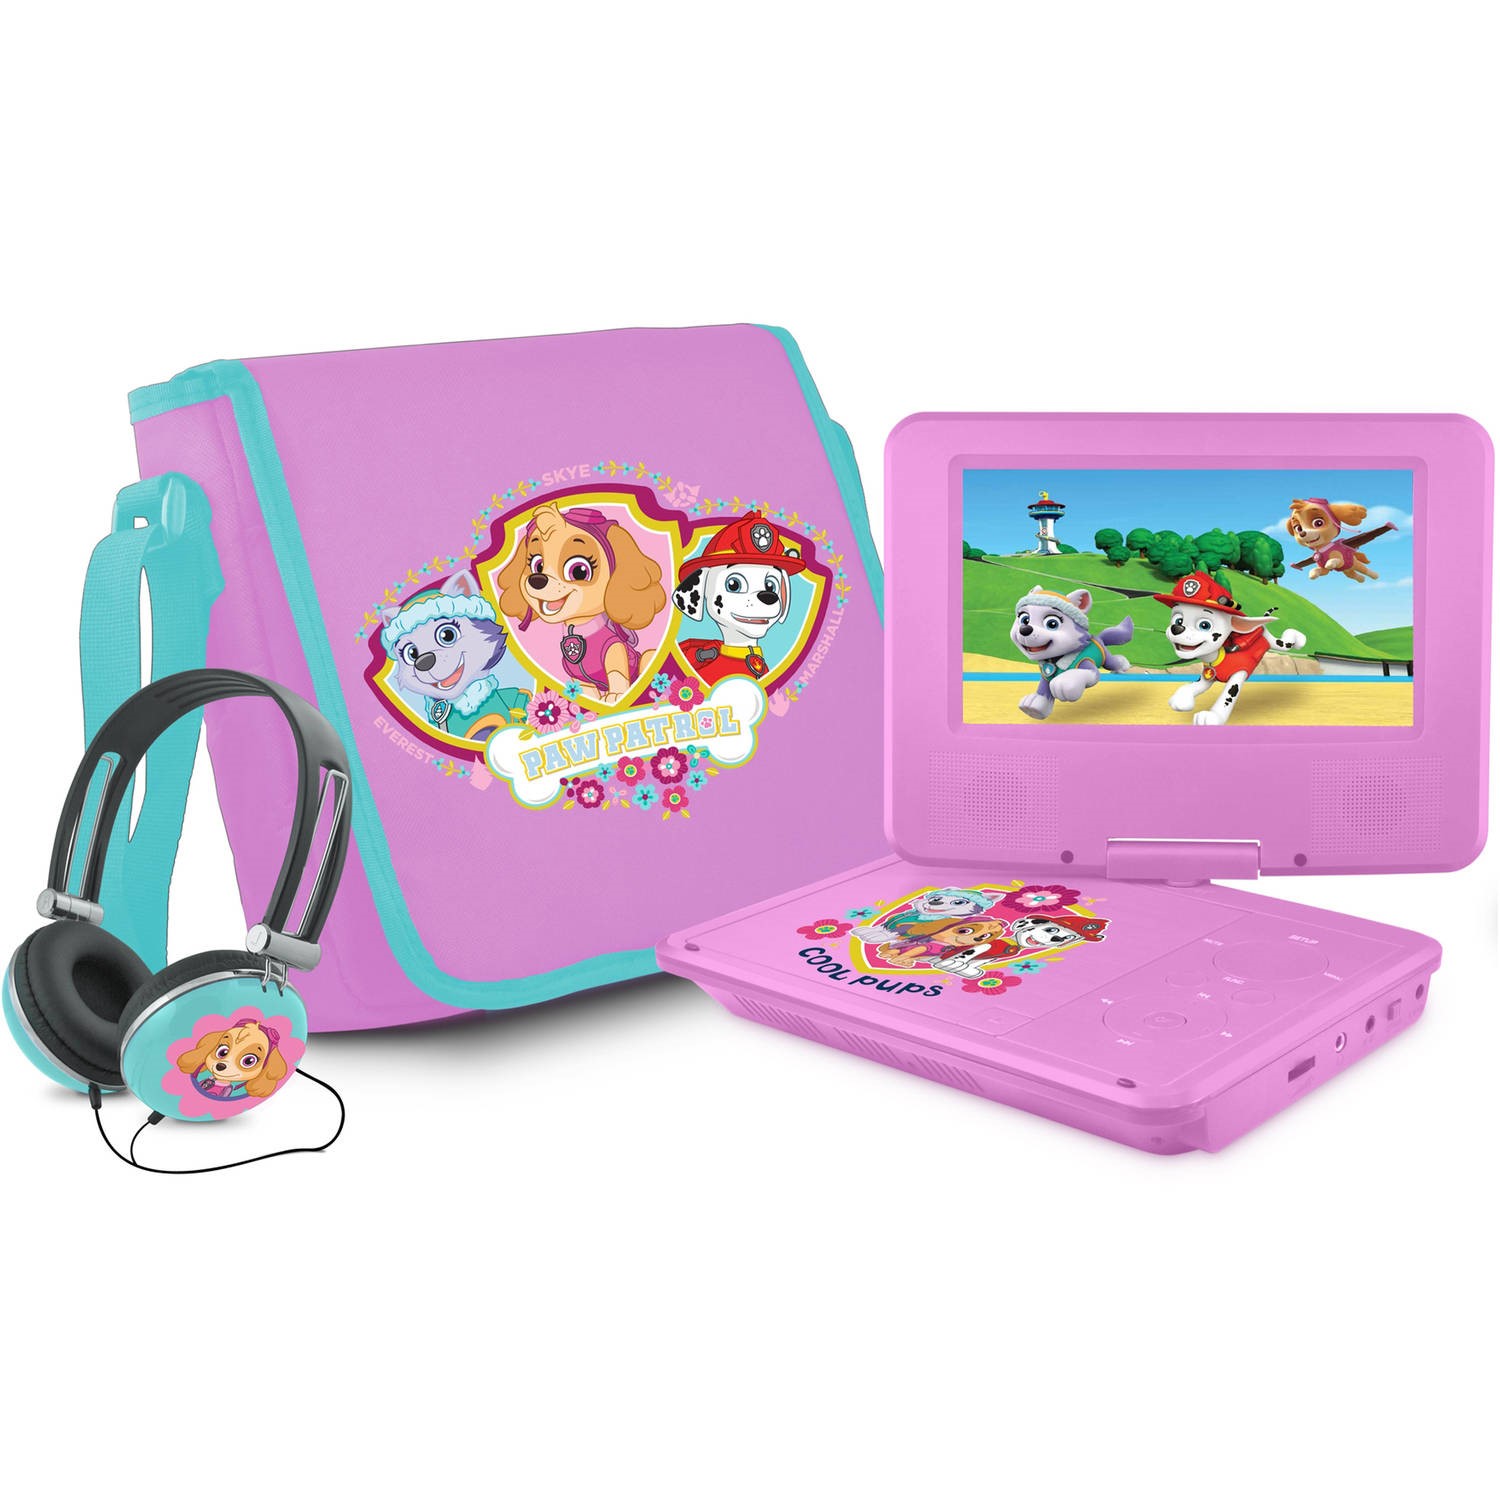 PAW Patrol 7" Portable DVD Player with Carrying Bag and Headphones, Pink - image 1 of 7